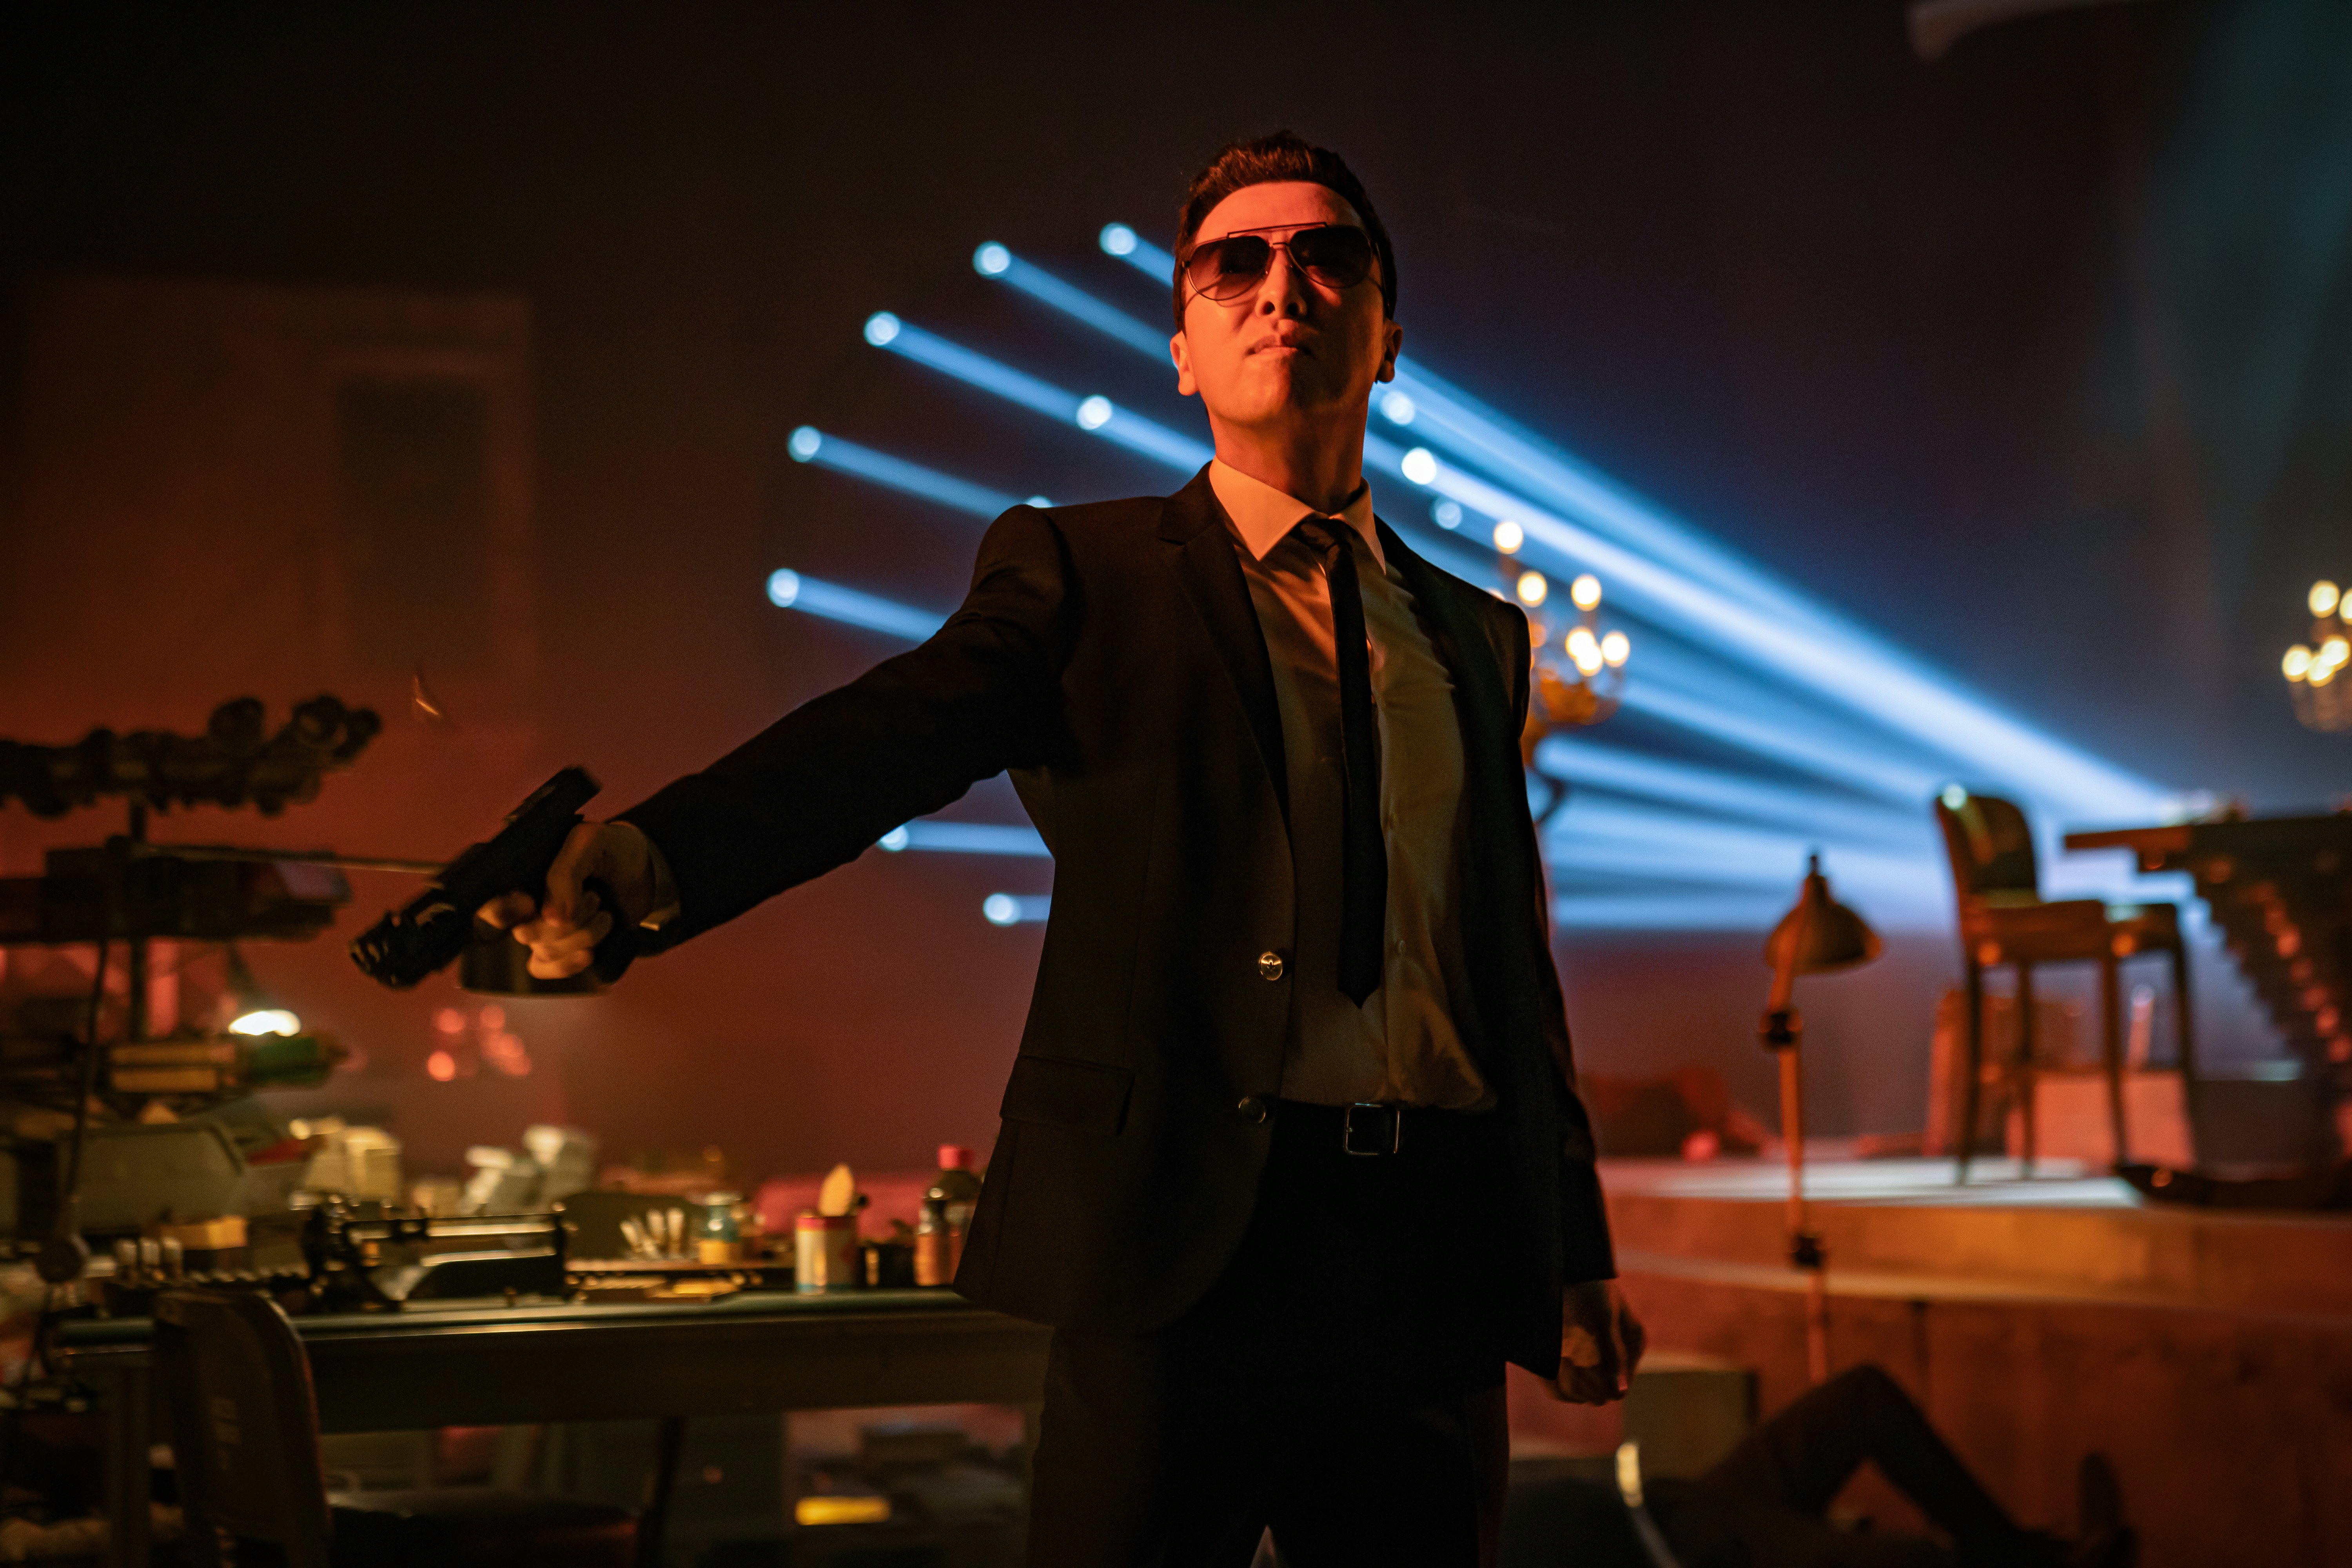 Donnie Yen says he fought for his 'John Wick,' 'Star Wars' characters to  not be Asian stereotypes